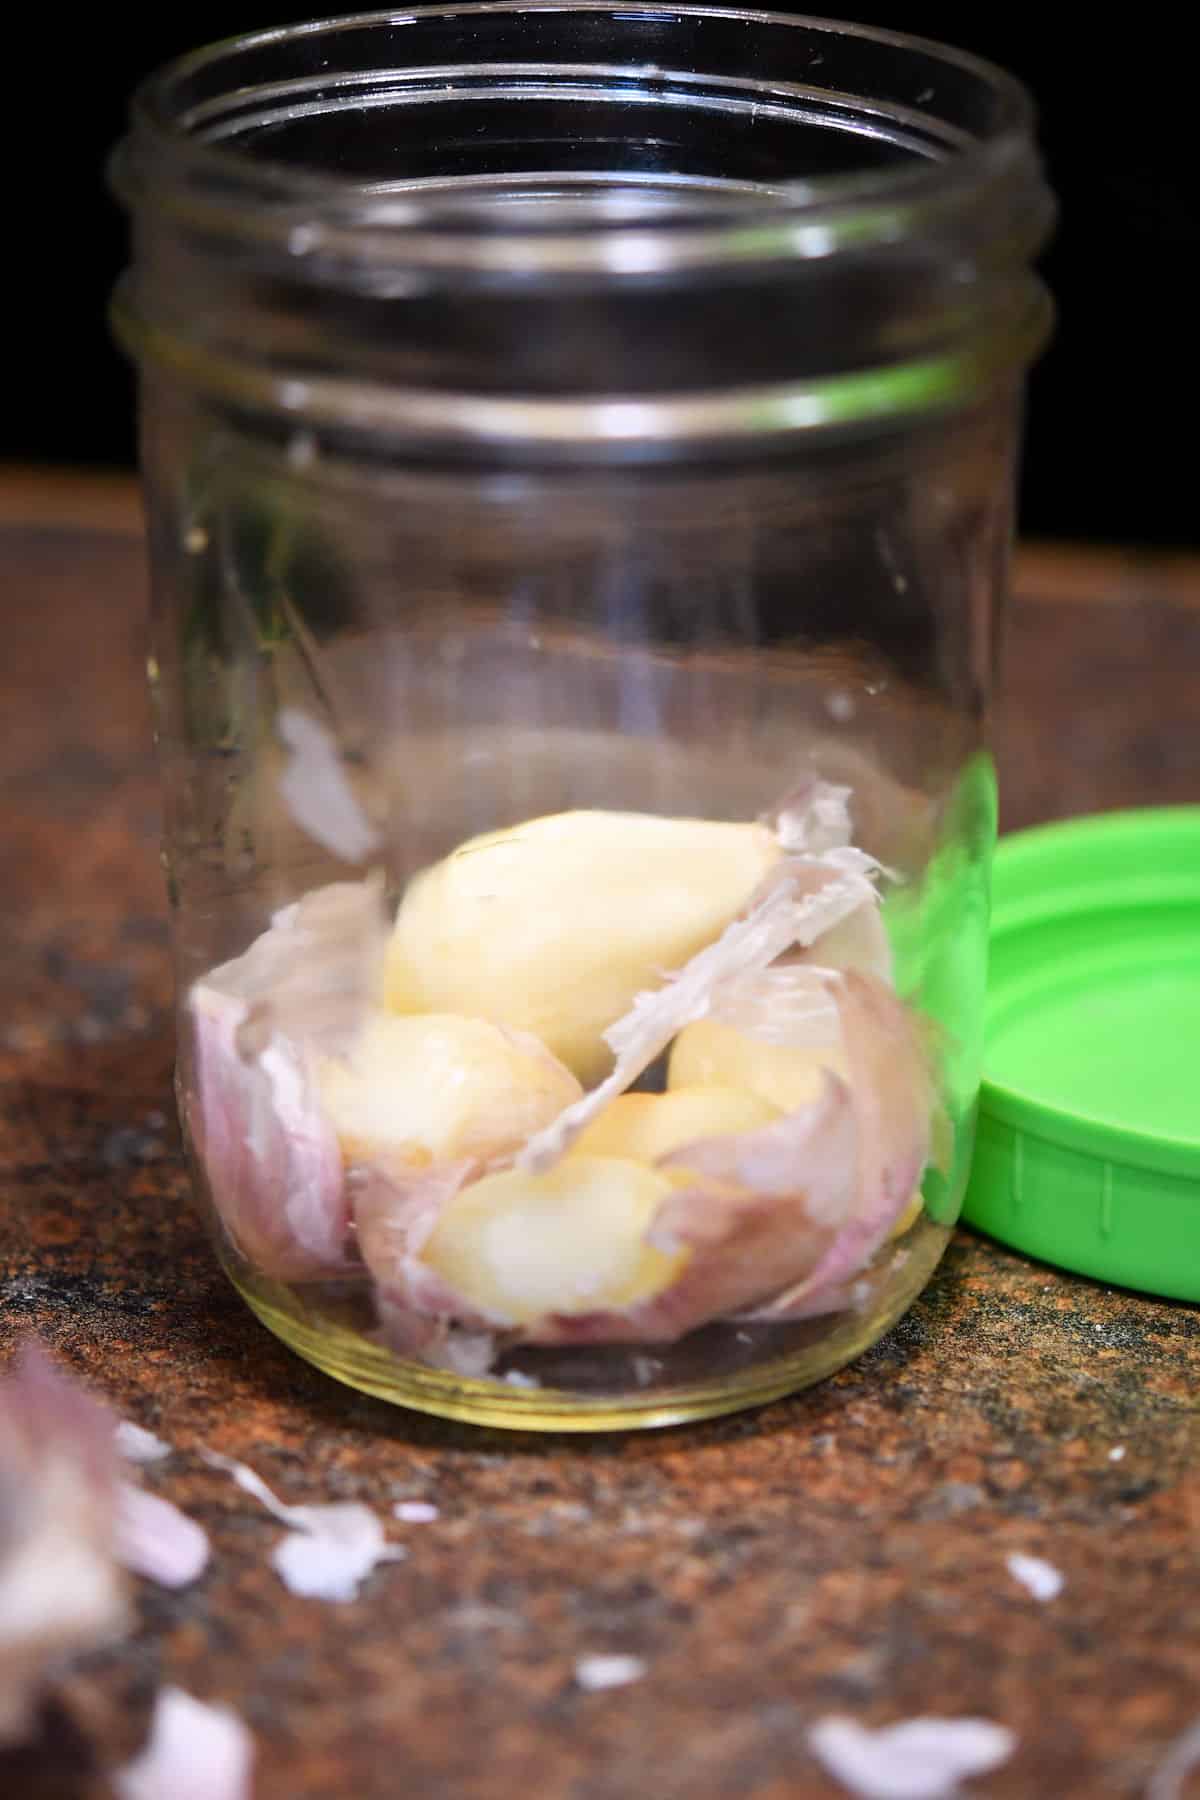 garlic cloves in a pint jar with little pieces of the peel remaining